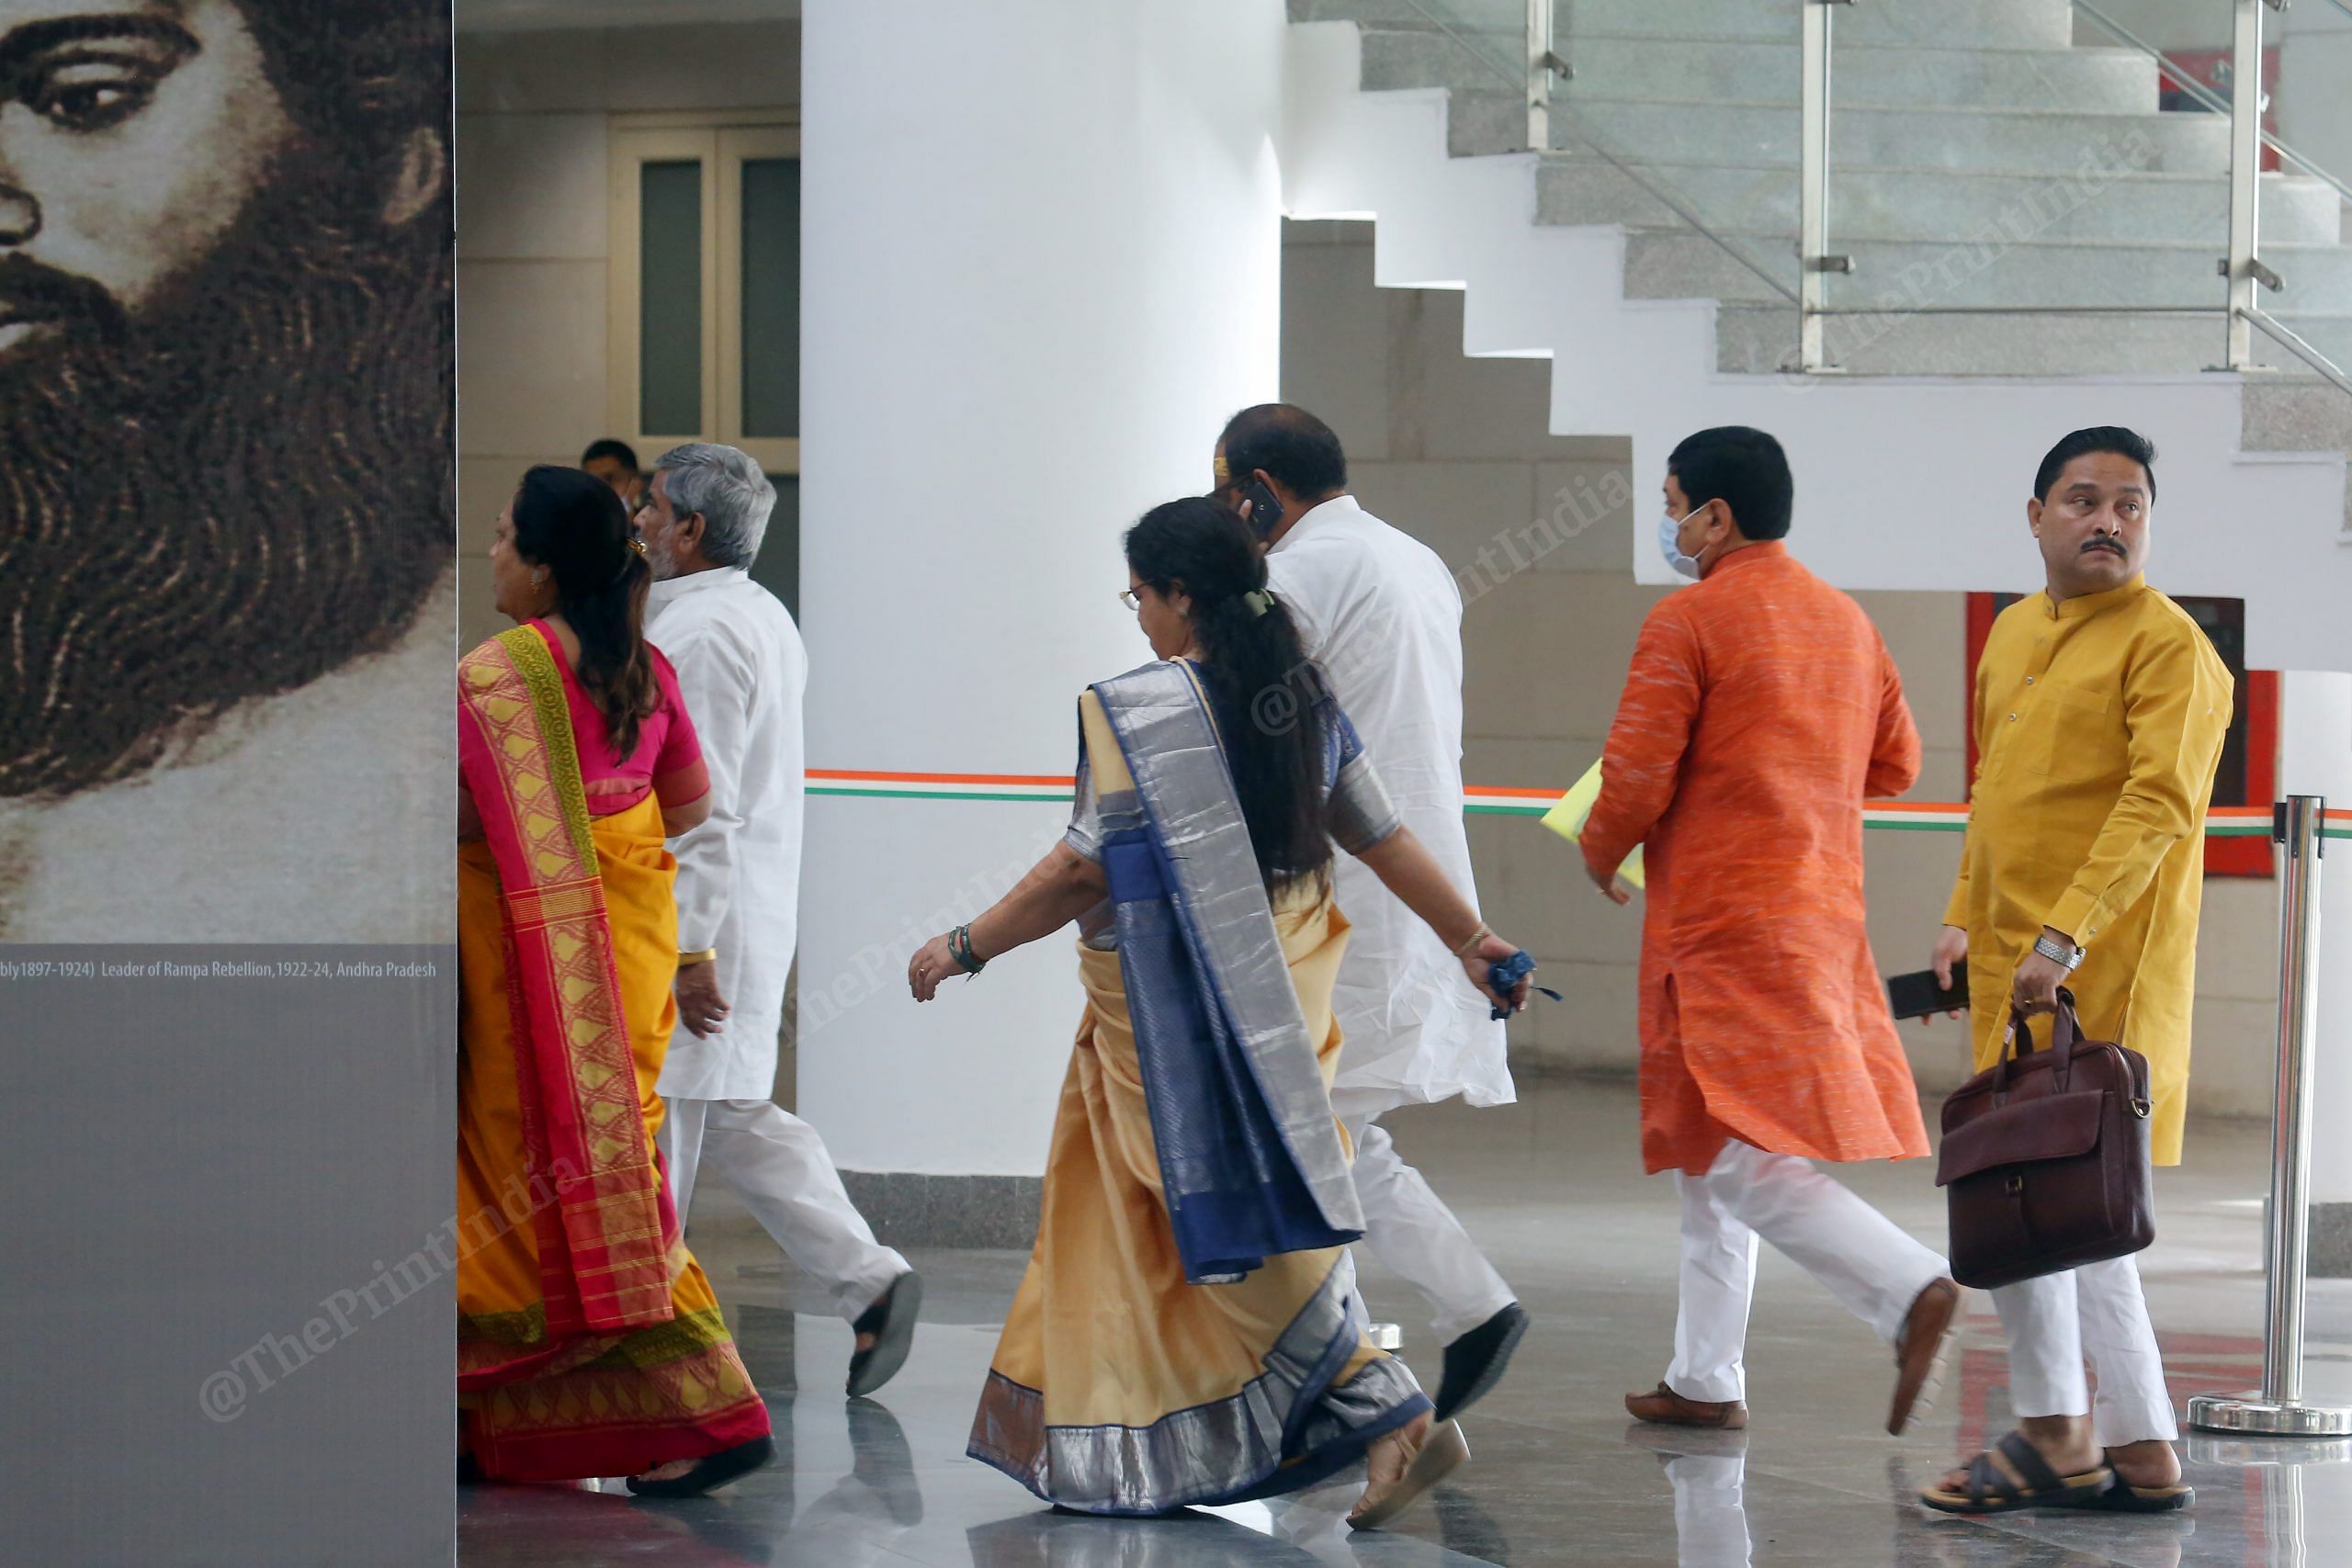 BJP MP's rushing towards the Ambedkar Bhavan to attend BJP Parliamentary Party meeting while PM and Party President were sitting inside | Photo: Praveen Jain | ThePrint